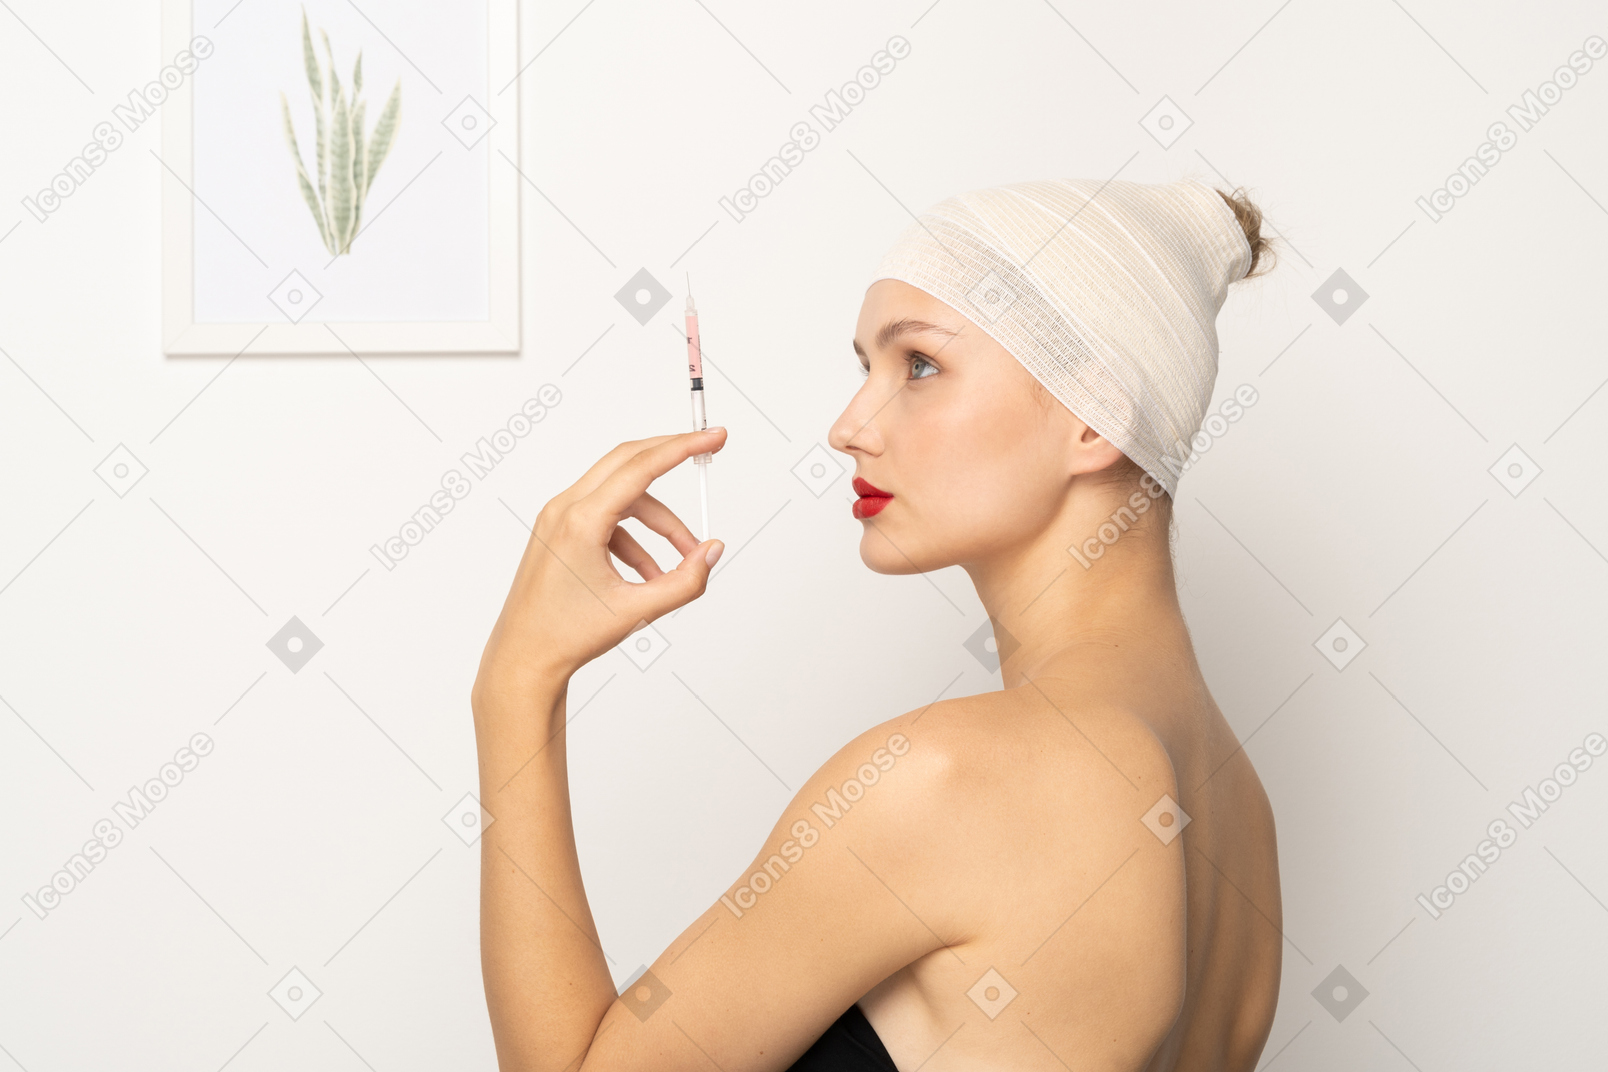 Side view of a young woman holding syringe